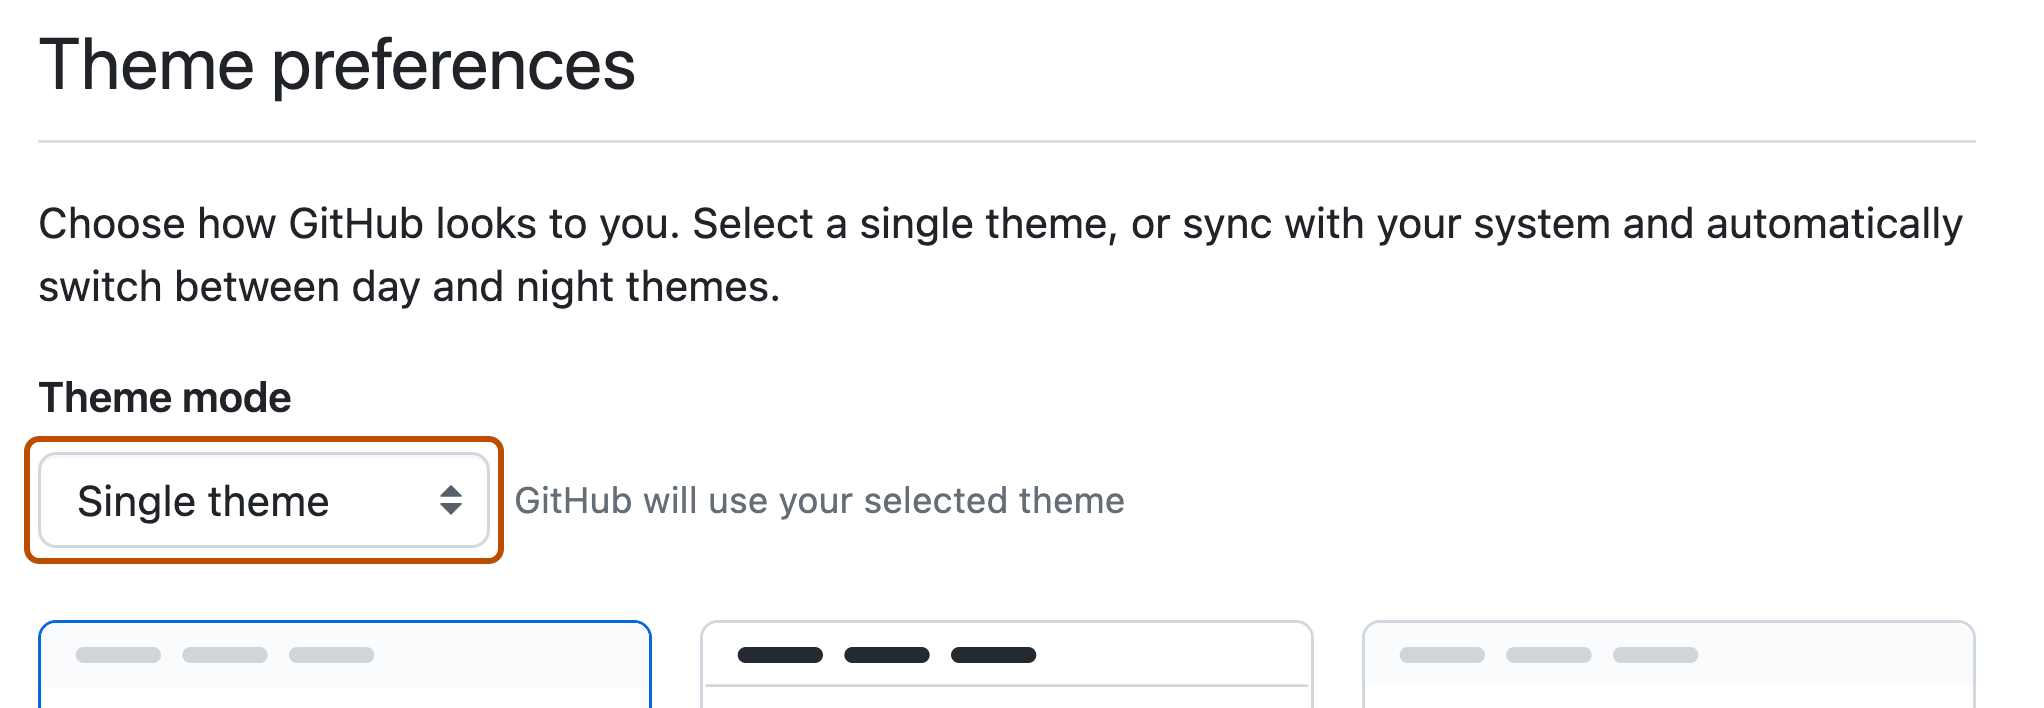 Drop-down menu under "Theme mode" for selection of theme preference